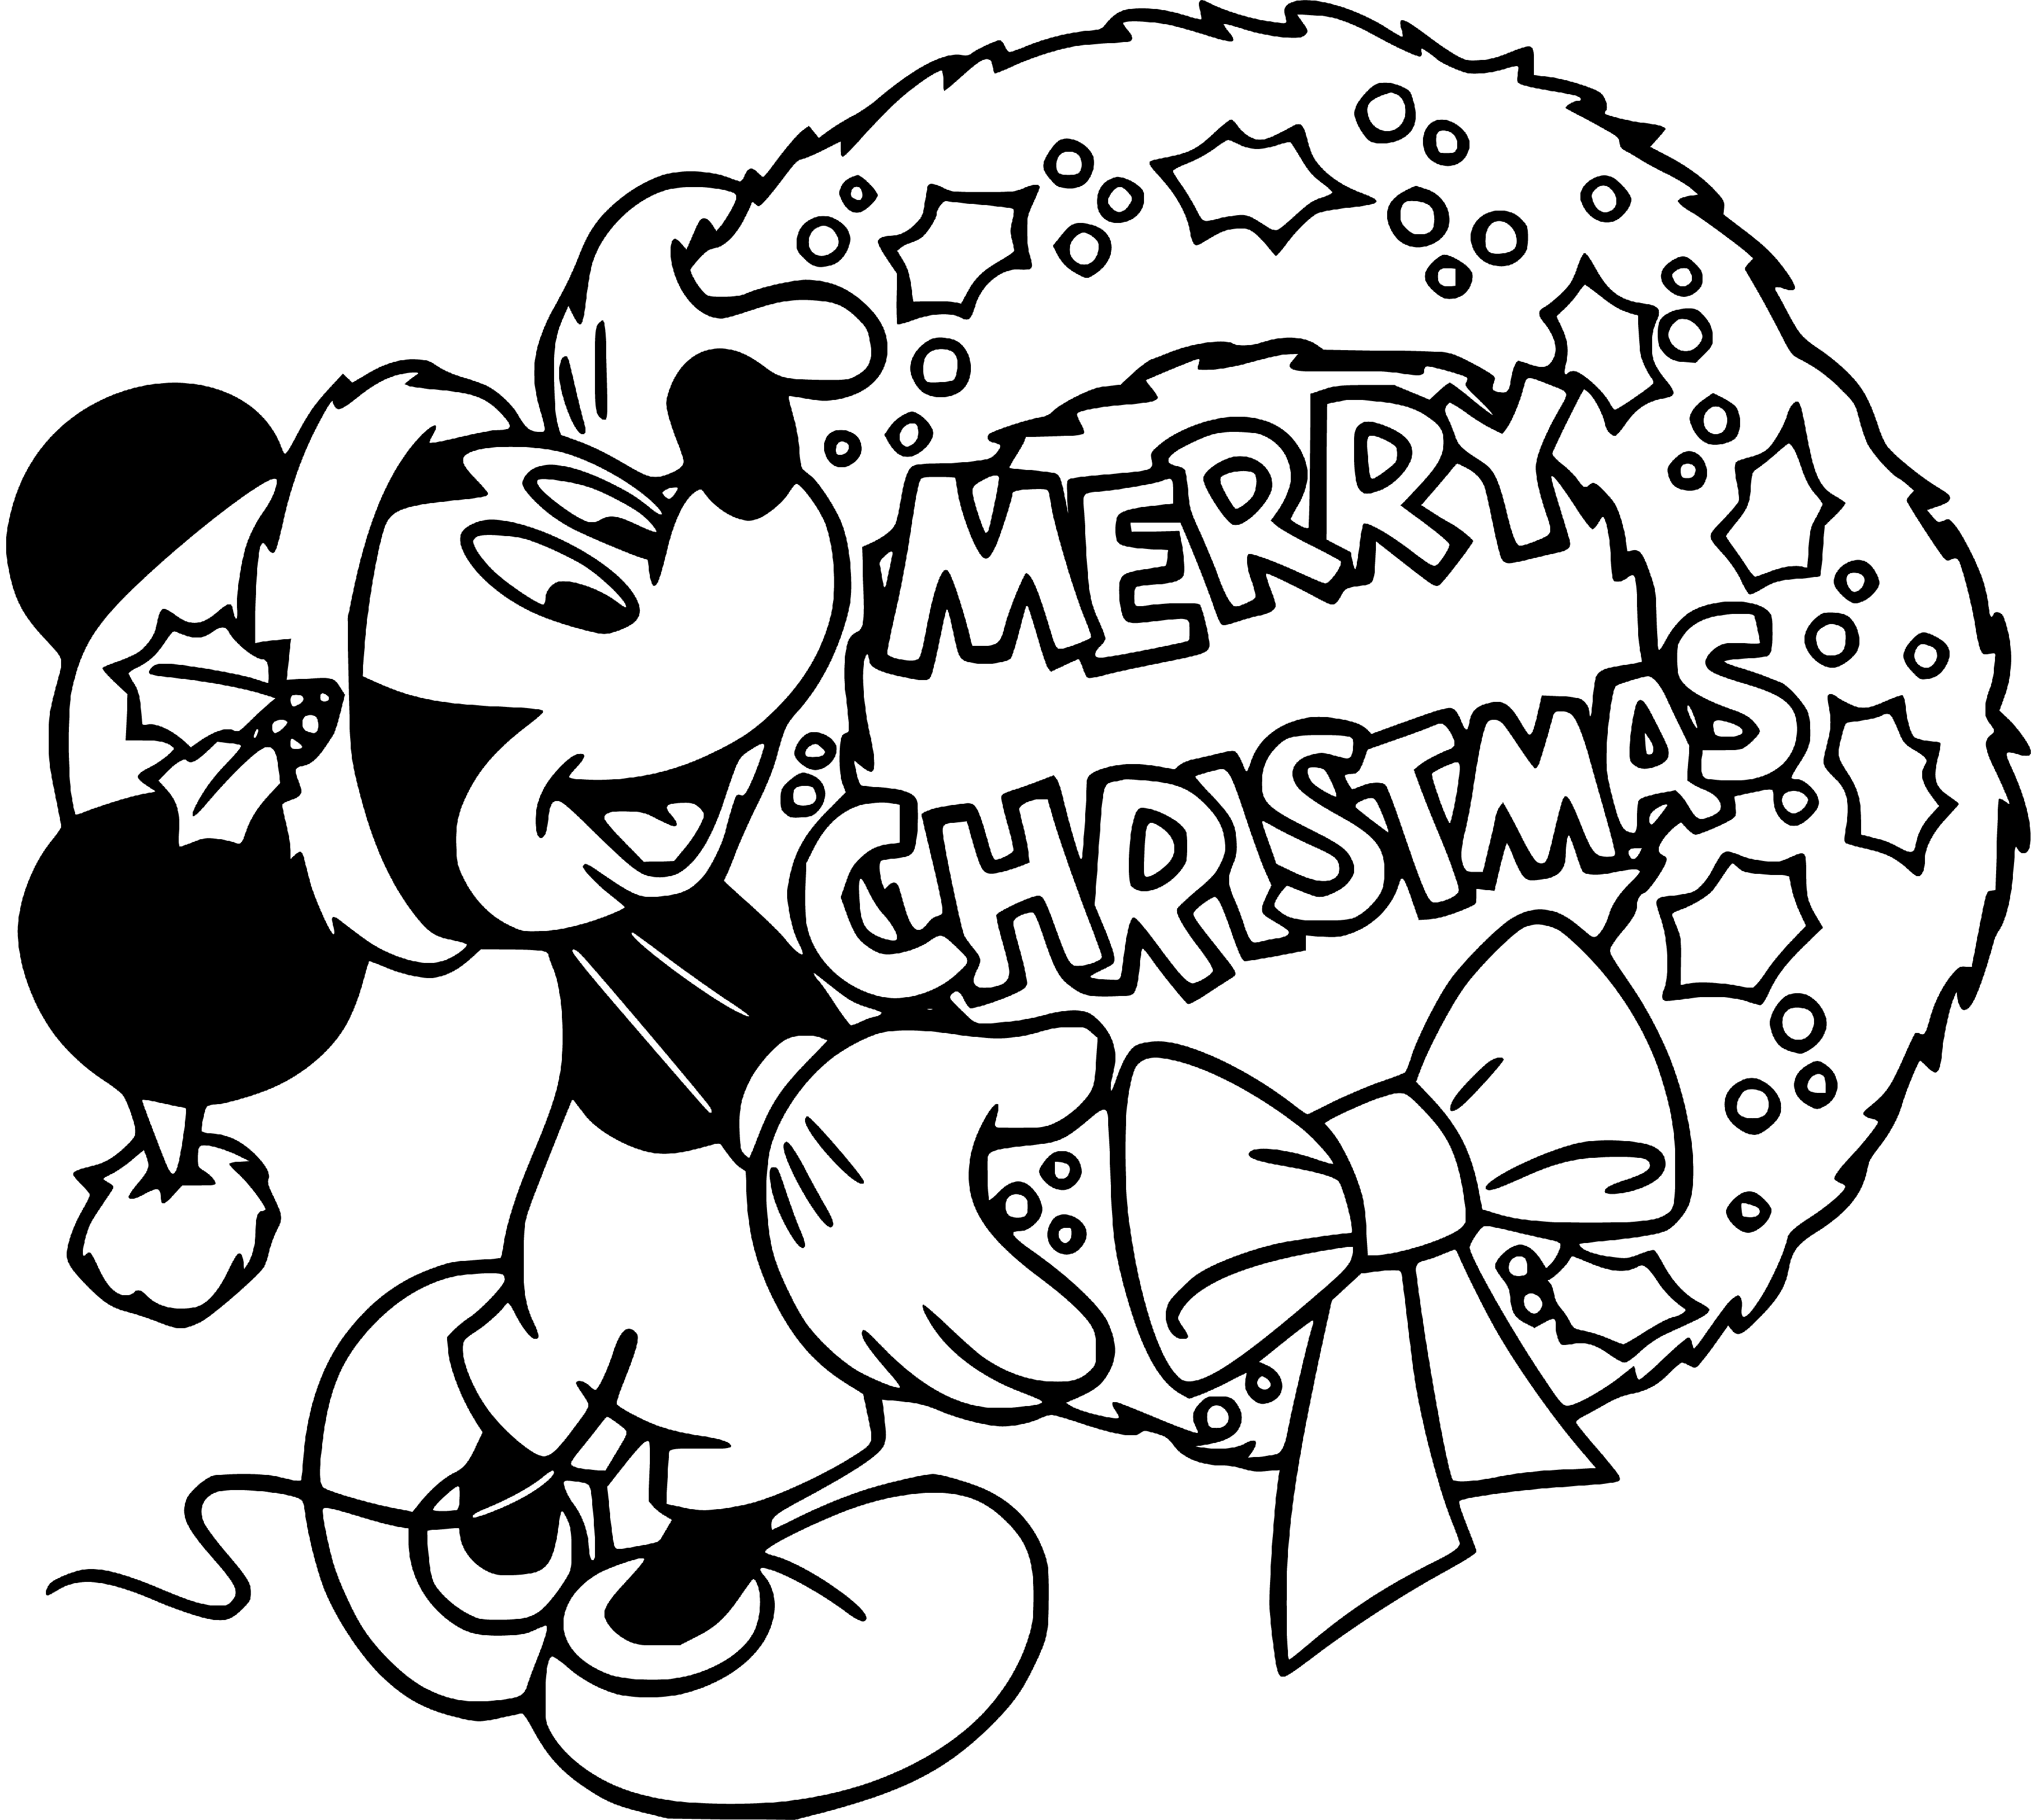 Printable Mickey Merry Christmas Coloring Page for kids.